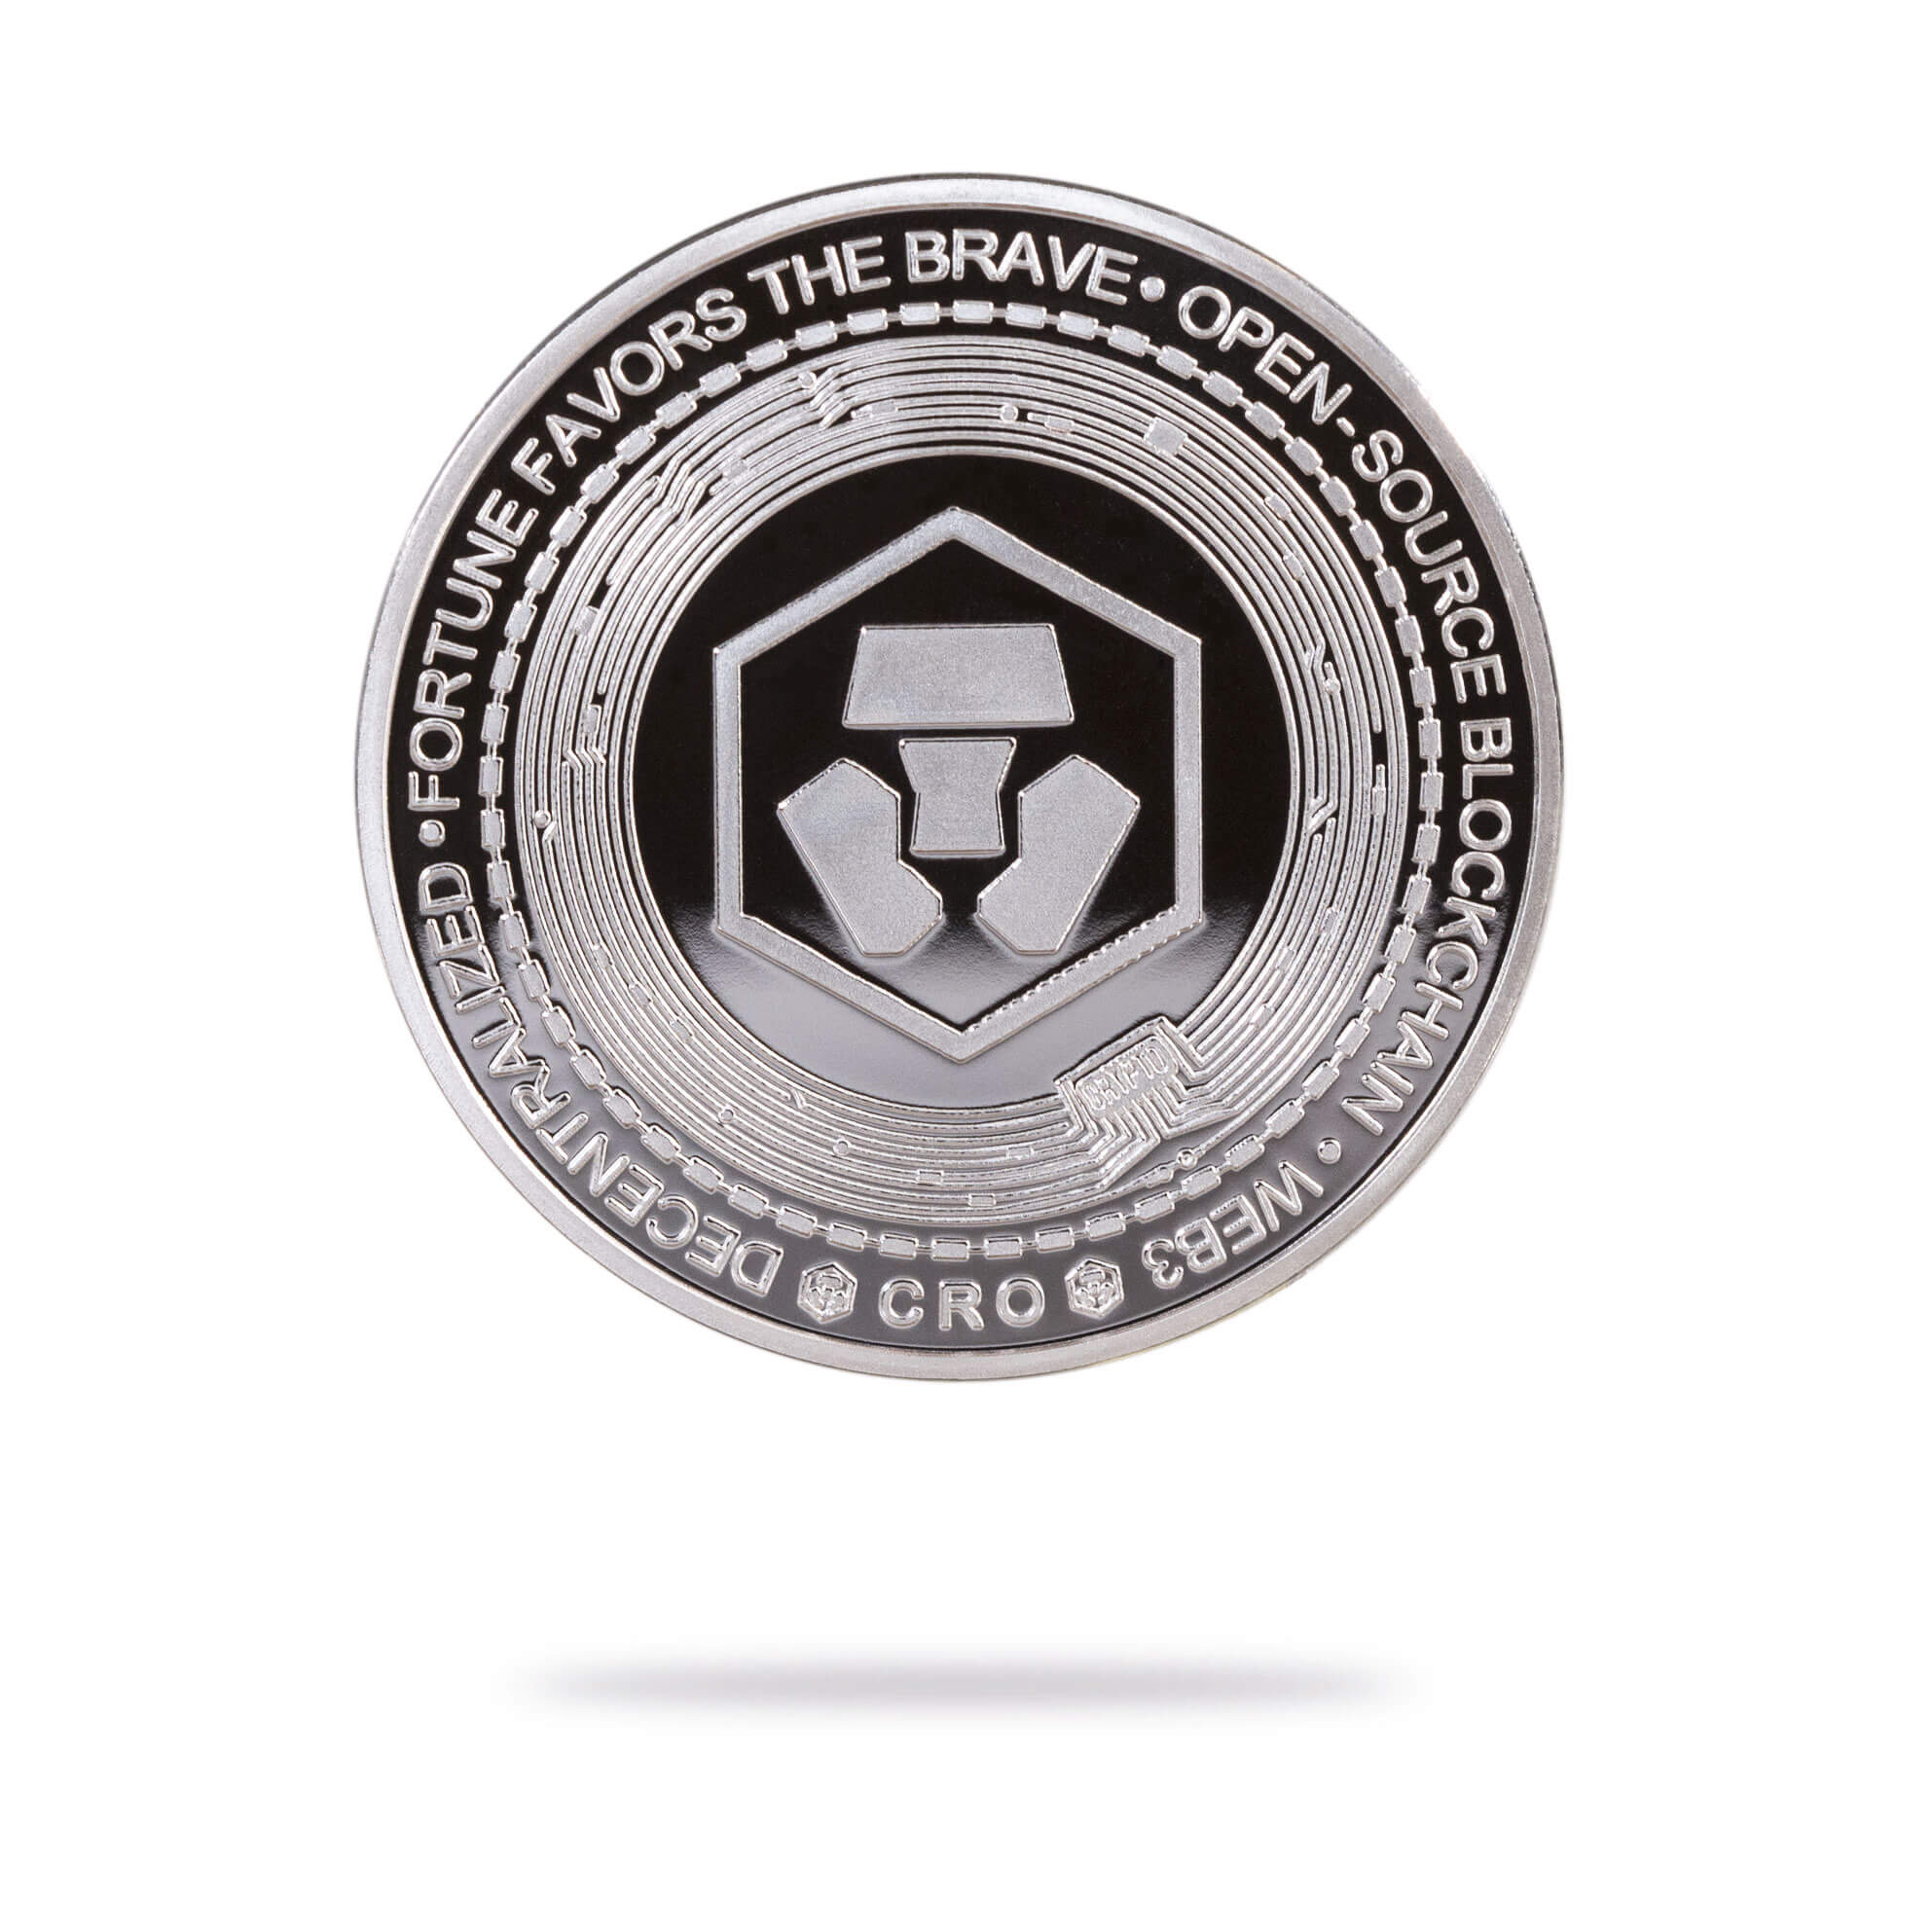 Cryptochips | Crypto.com Physical Crypto Coin. Collectable cryptocurrency merch you can hodl